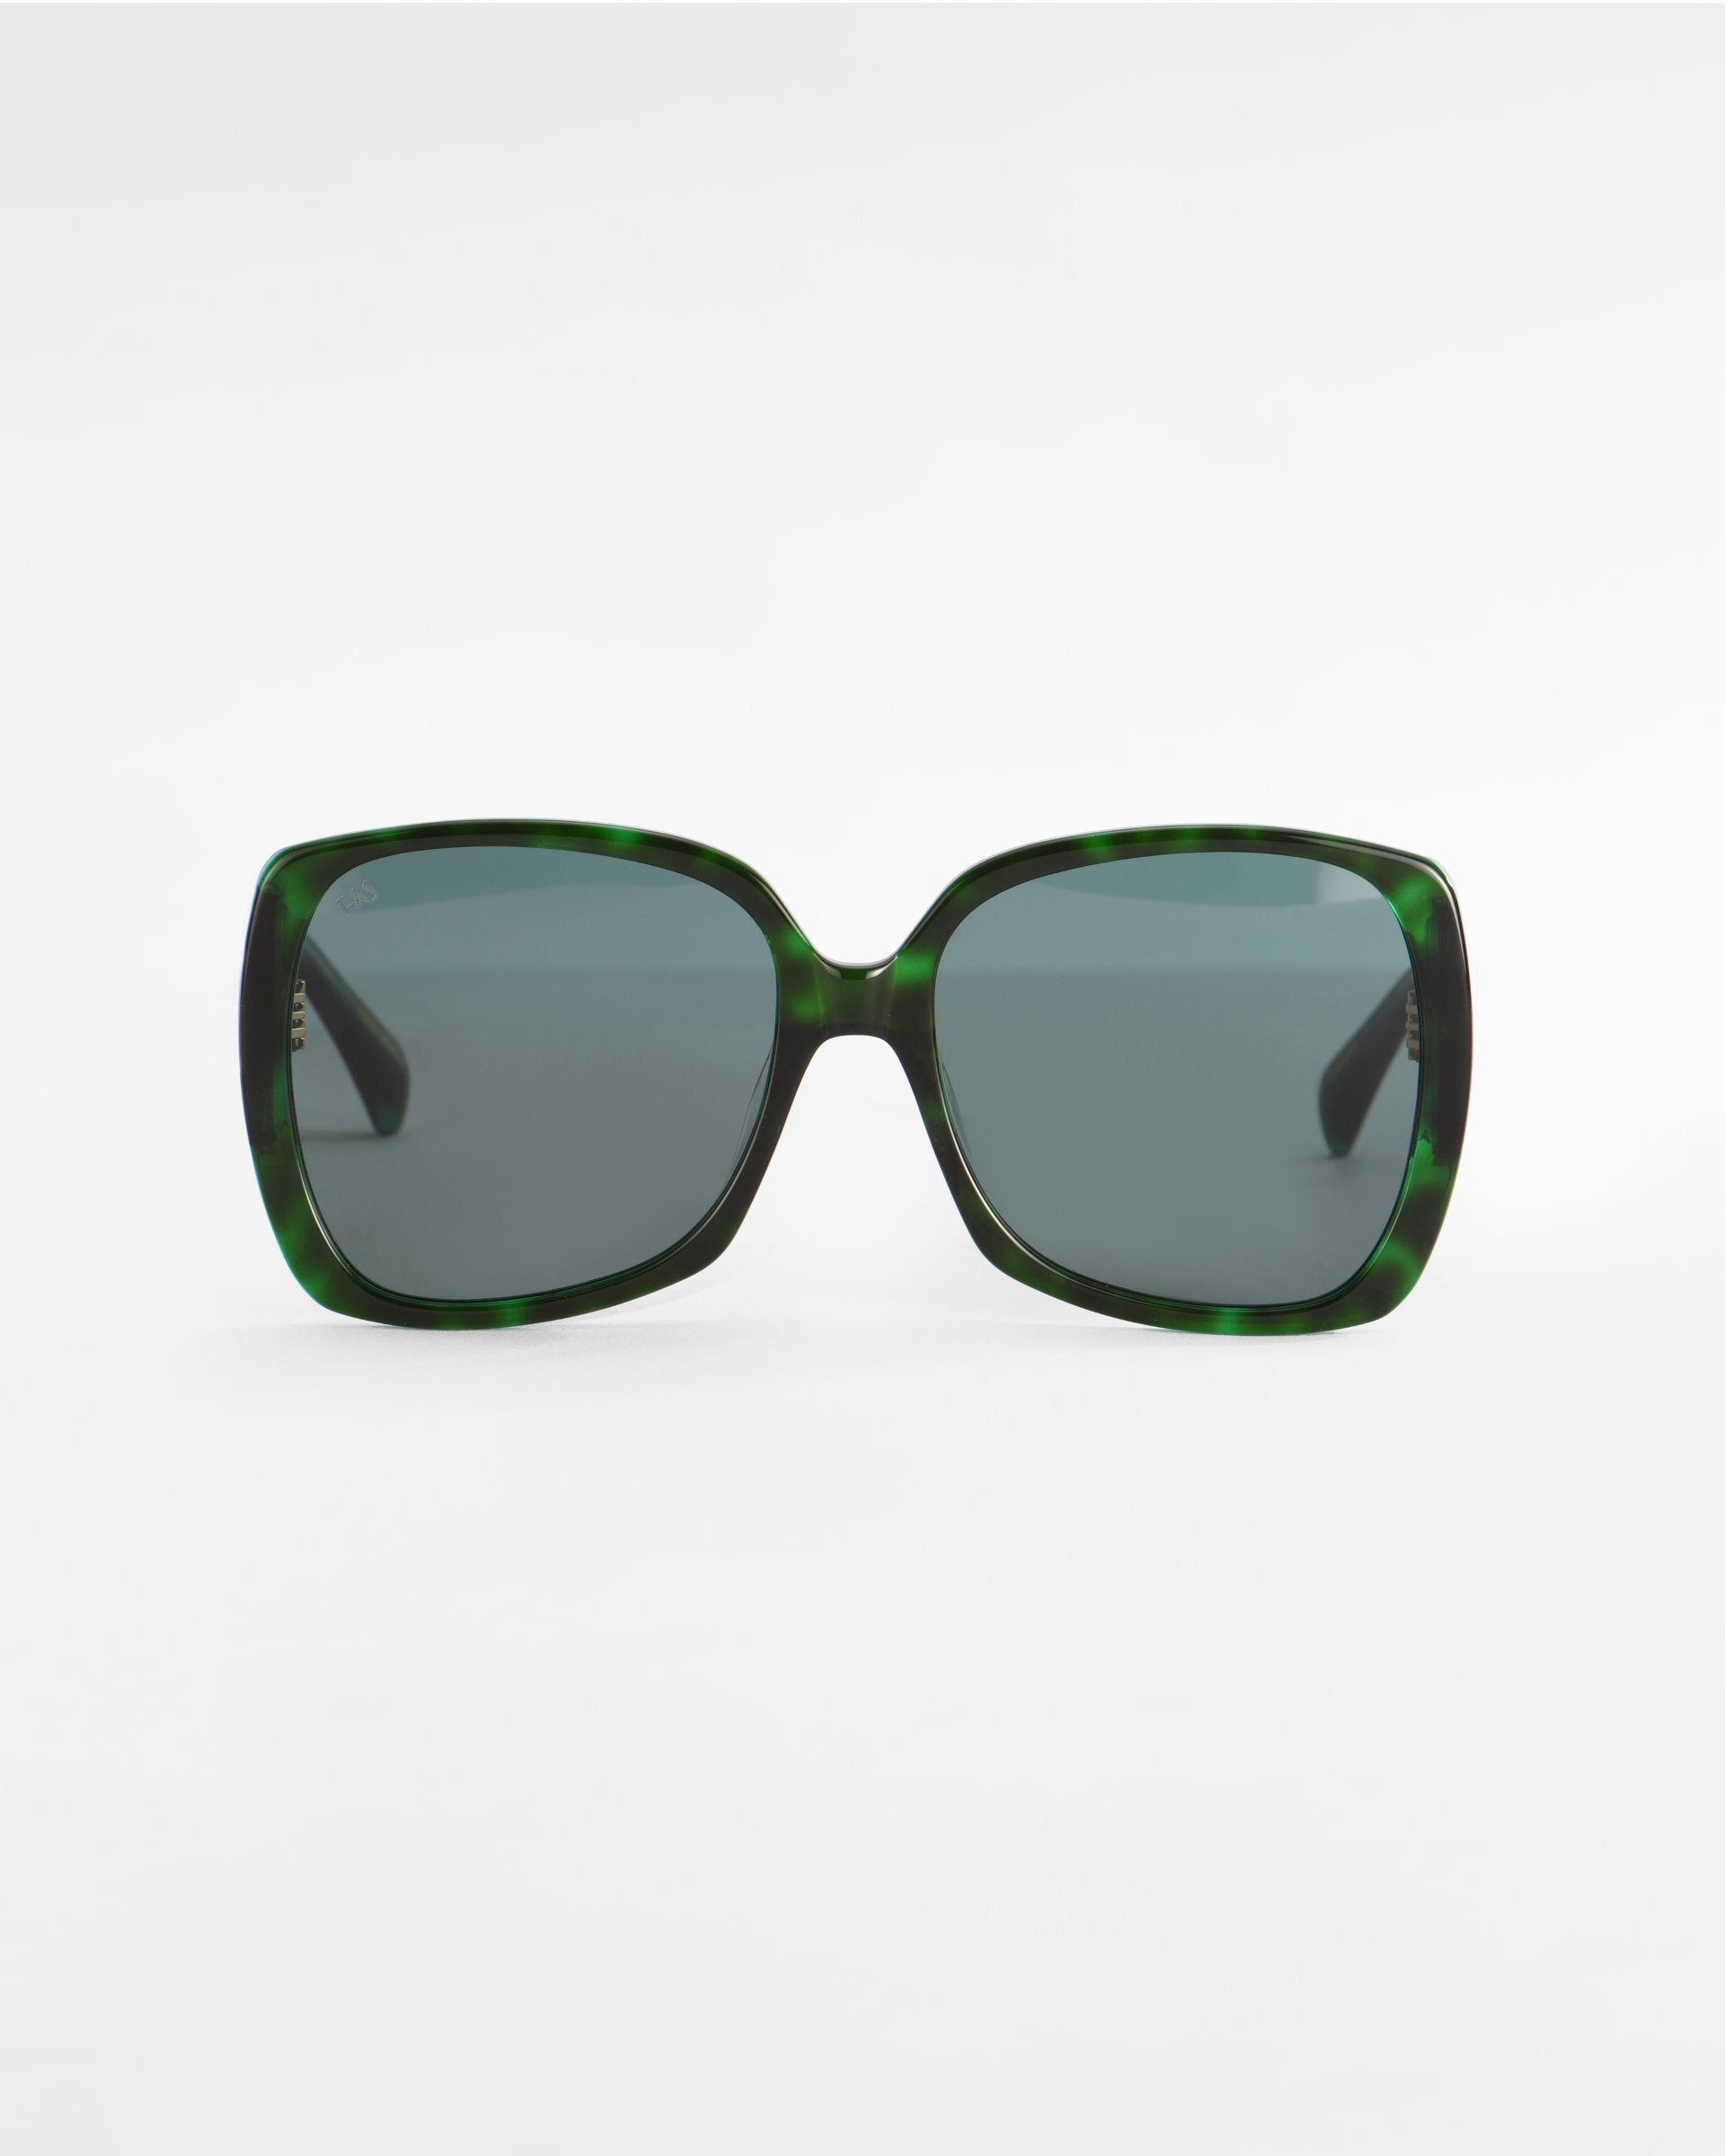 A pair of green, square-shaped Odyssey sunglasses by For Art&#39;s Sake® with dark tinted, lightweight nylon lenses against a plain white background. The frame features plant-based acetate with a subtle marbled pattern, adding a textured look.